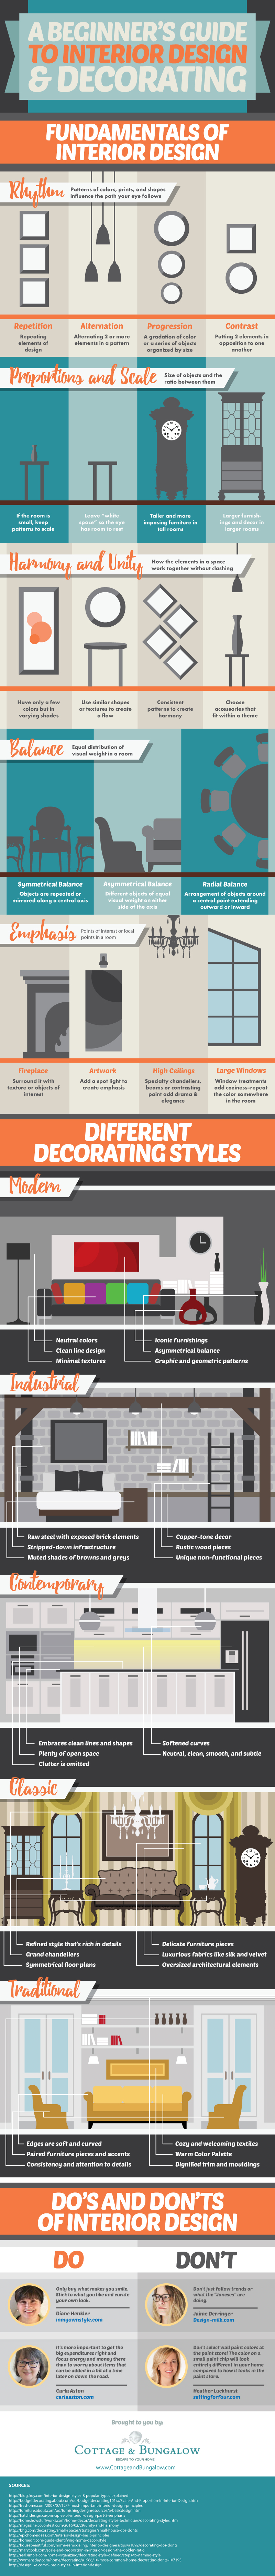 A Beginner's Guide to Interior Design & Decorating